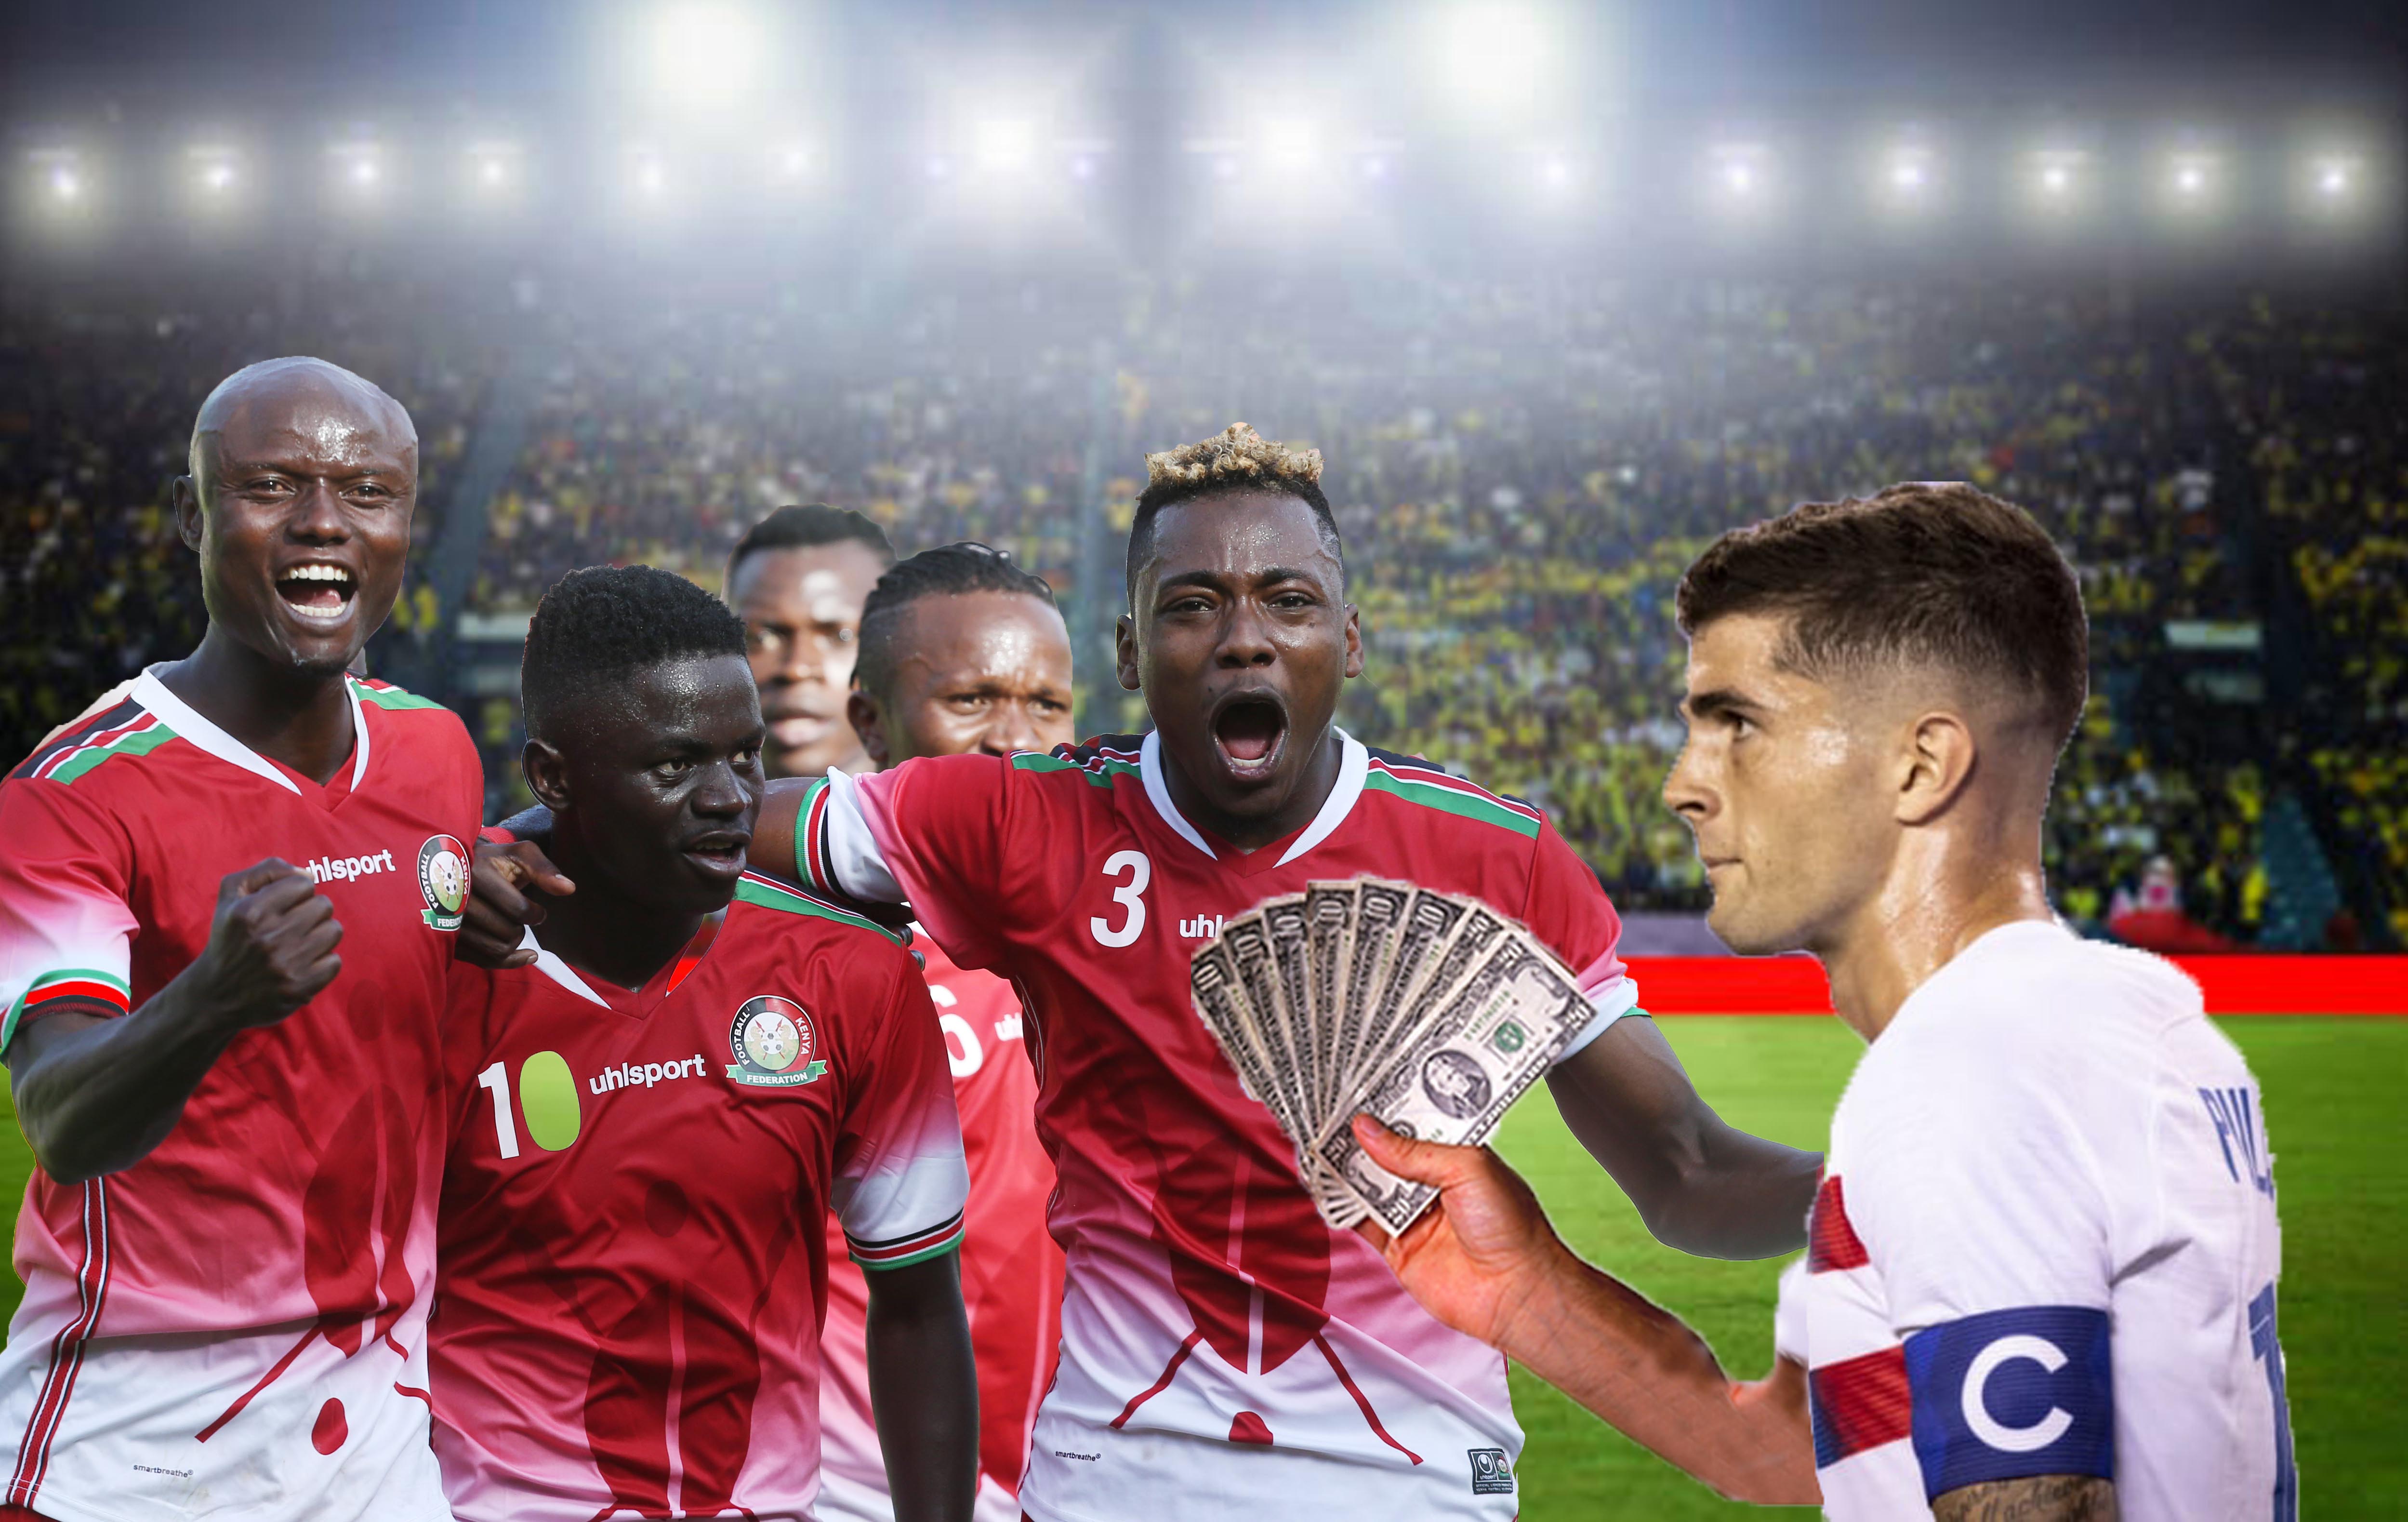 Qlamqtar 2022 World Cup – Team Profile: Kenya – 20, 22 things about Kenya that you’d have to be a goddam moron not to already know (pt.1)